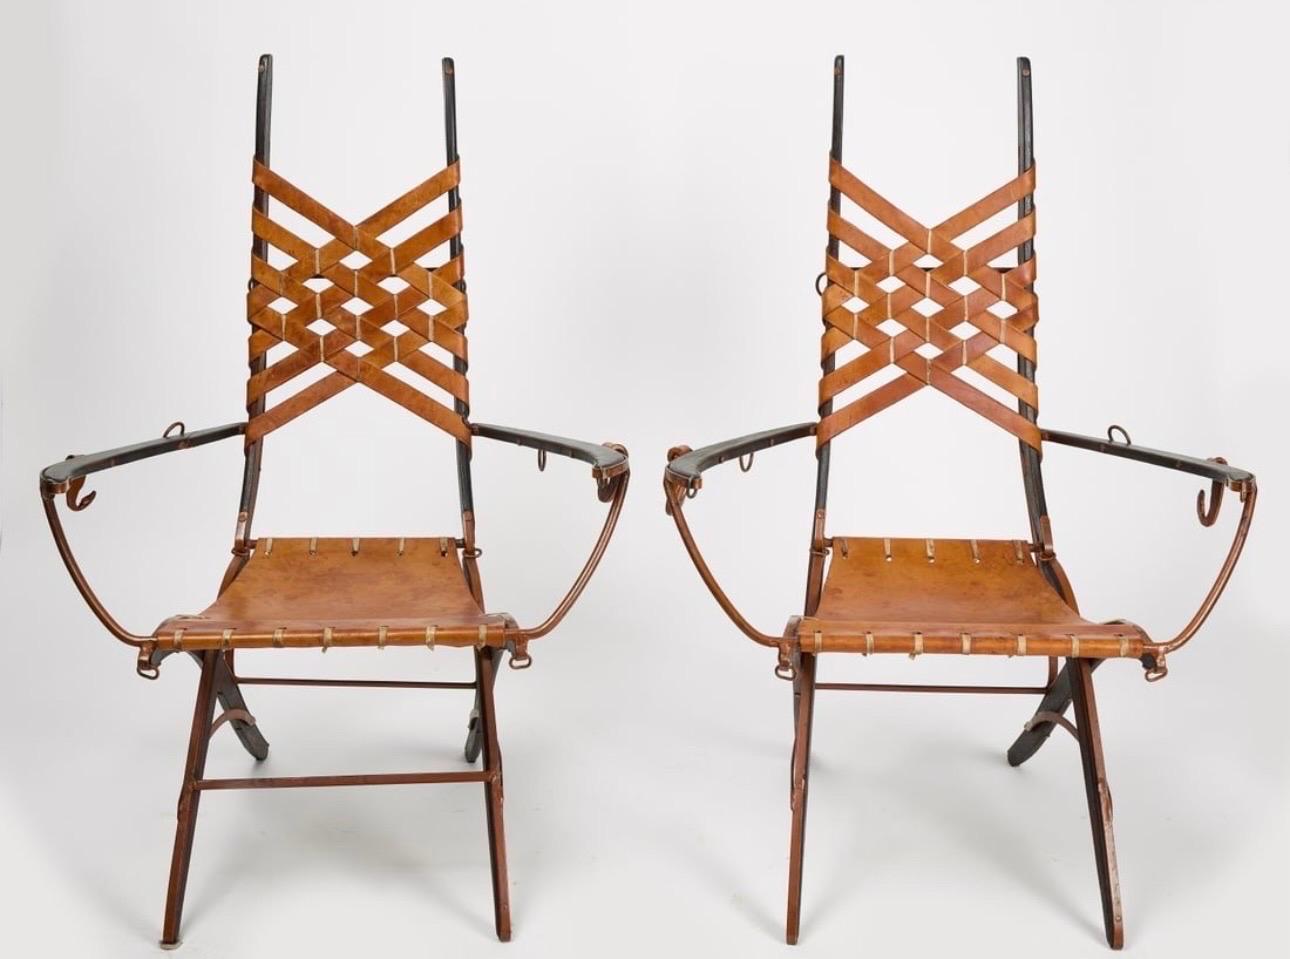 A set of 4 Italian armchairs by Alberto Marconetti. These detailed chairs are made of iron, leather and wood. 
Beautiful craftsmanship, these chairs have great detail. The chairs are all stamped A. Marconetti on the leather straps on back.
The